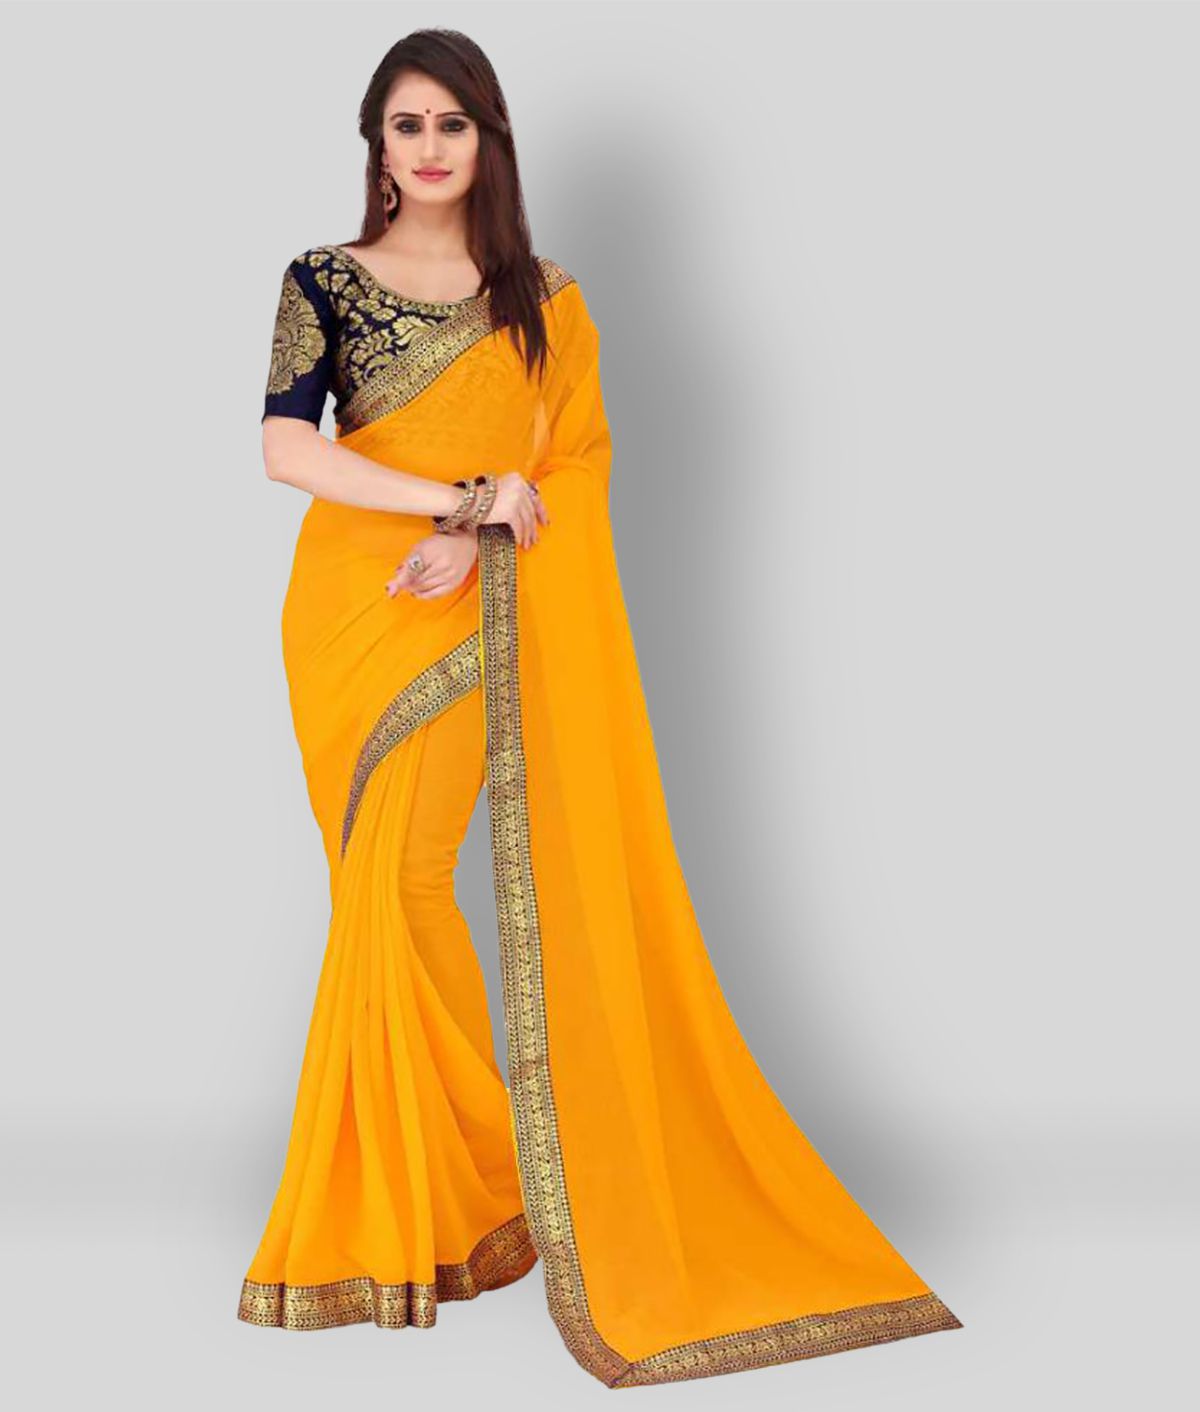     			ANAND SAREES - Yellow Chiffon Saree With Blouse Piece (Pack of 1)